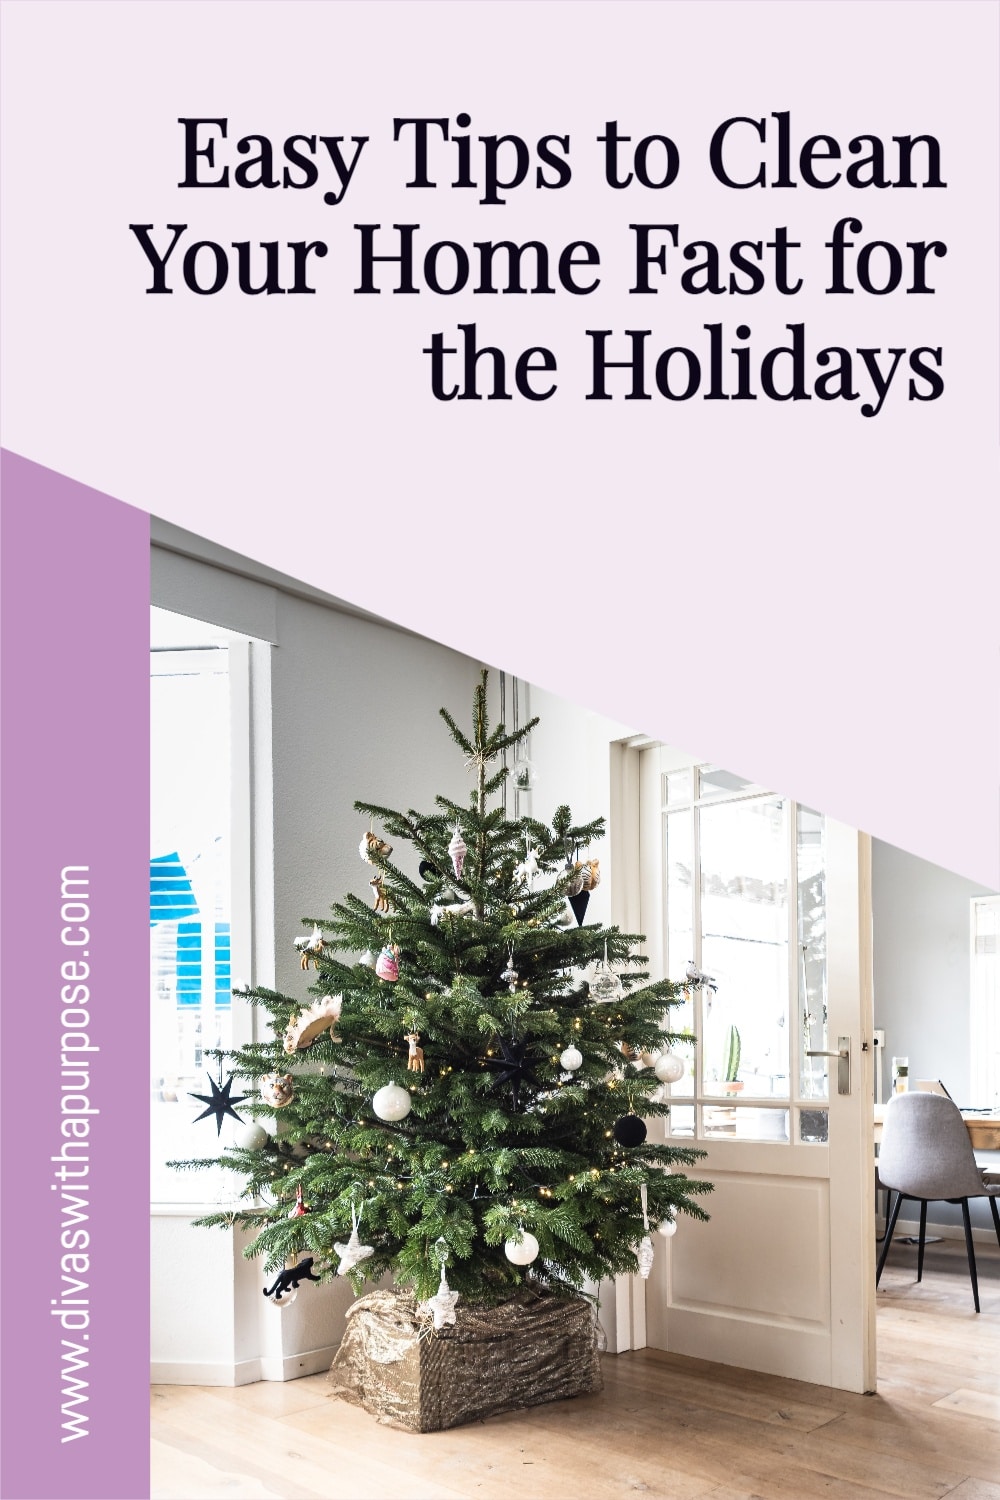  This article is all about easy tips to clean your home fast for the holidays. Let’s be real - cleaning is inevitable during the holiday season. Sometimes it can be overwhelming to do it all while still making time to spend with friends and family.